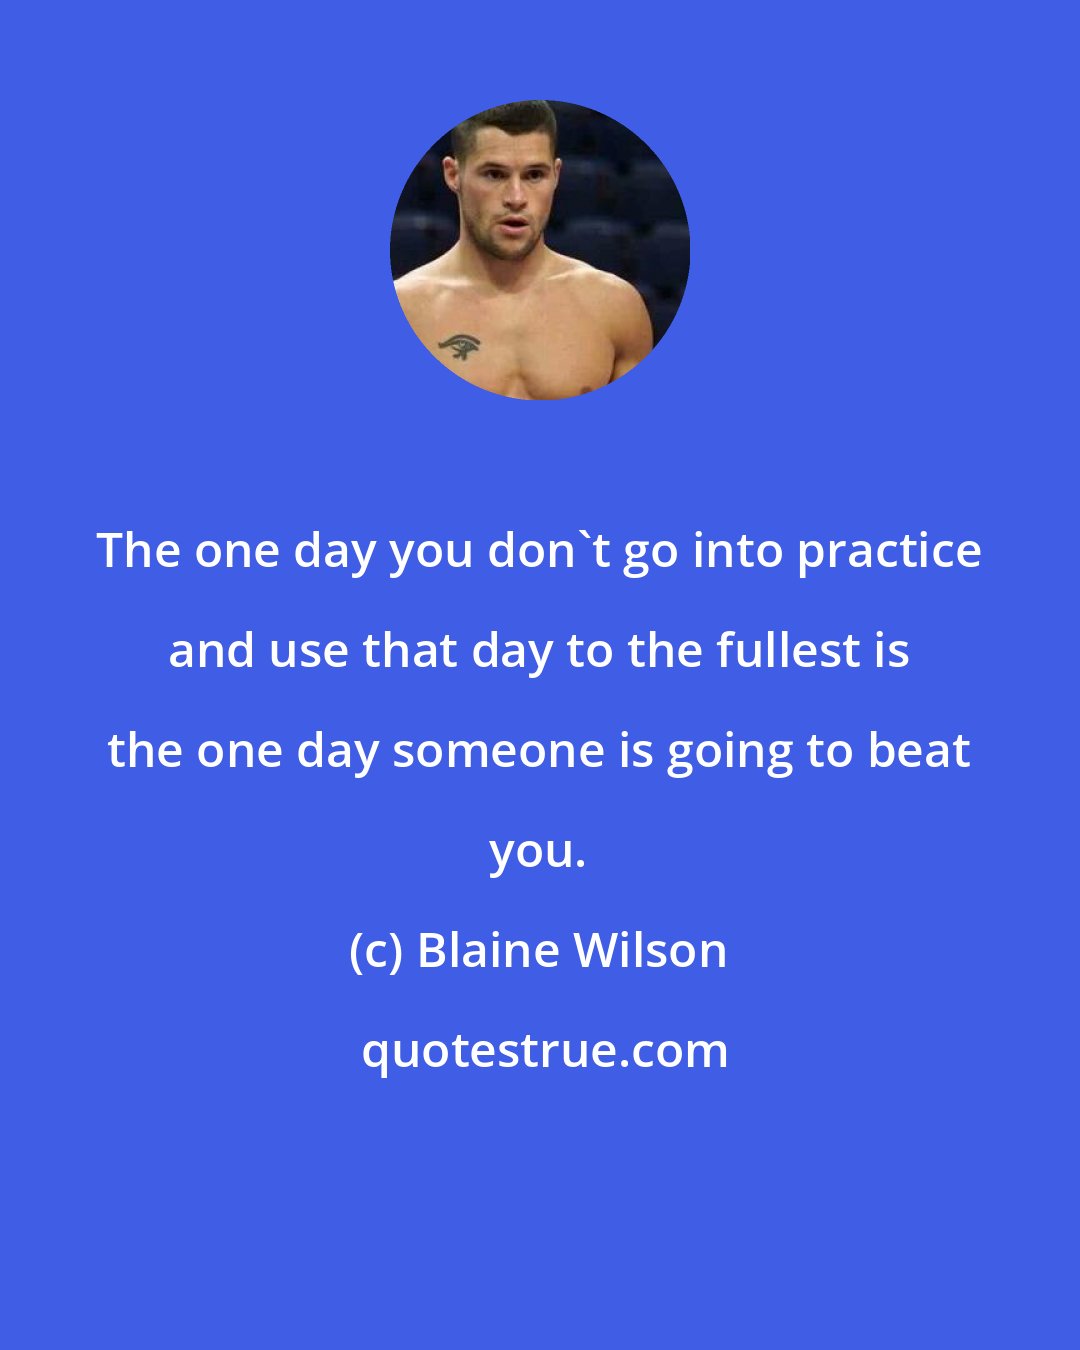 Blaine Wilson: The one day you don't go into practice and use that day to the fullest is the one day someone is going to beat you.